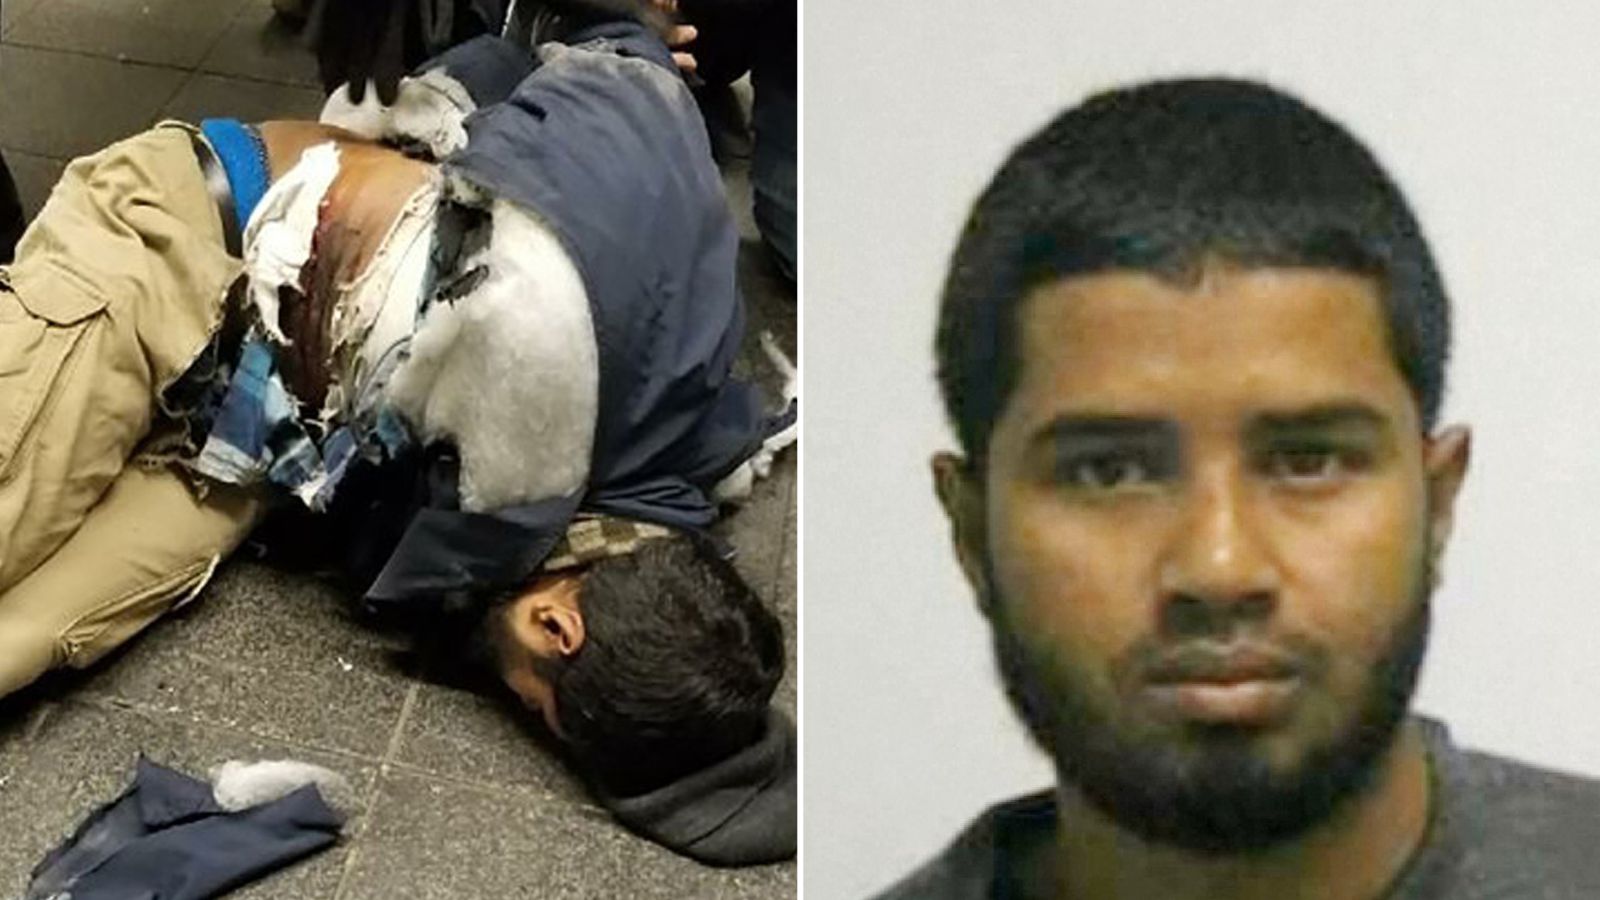 NYC Subway Bomber Sentenced to Life in Prison for Failer Terror Attack Inspired by ISIS